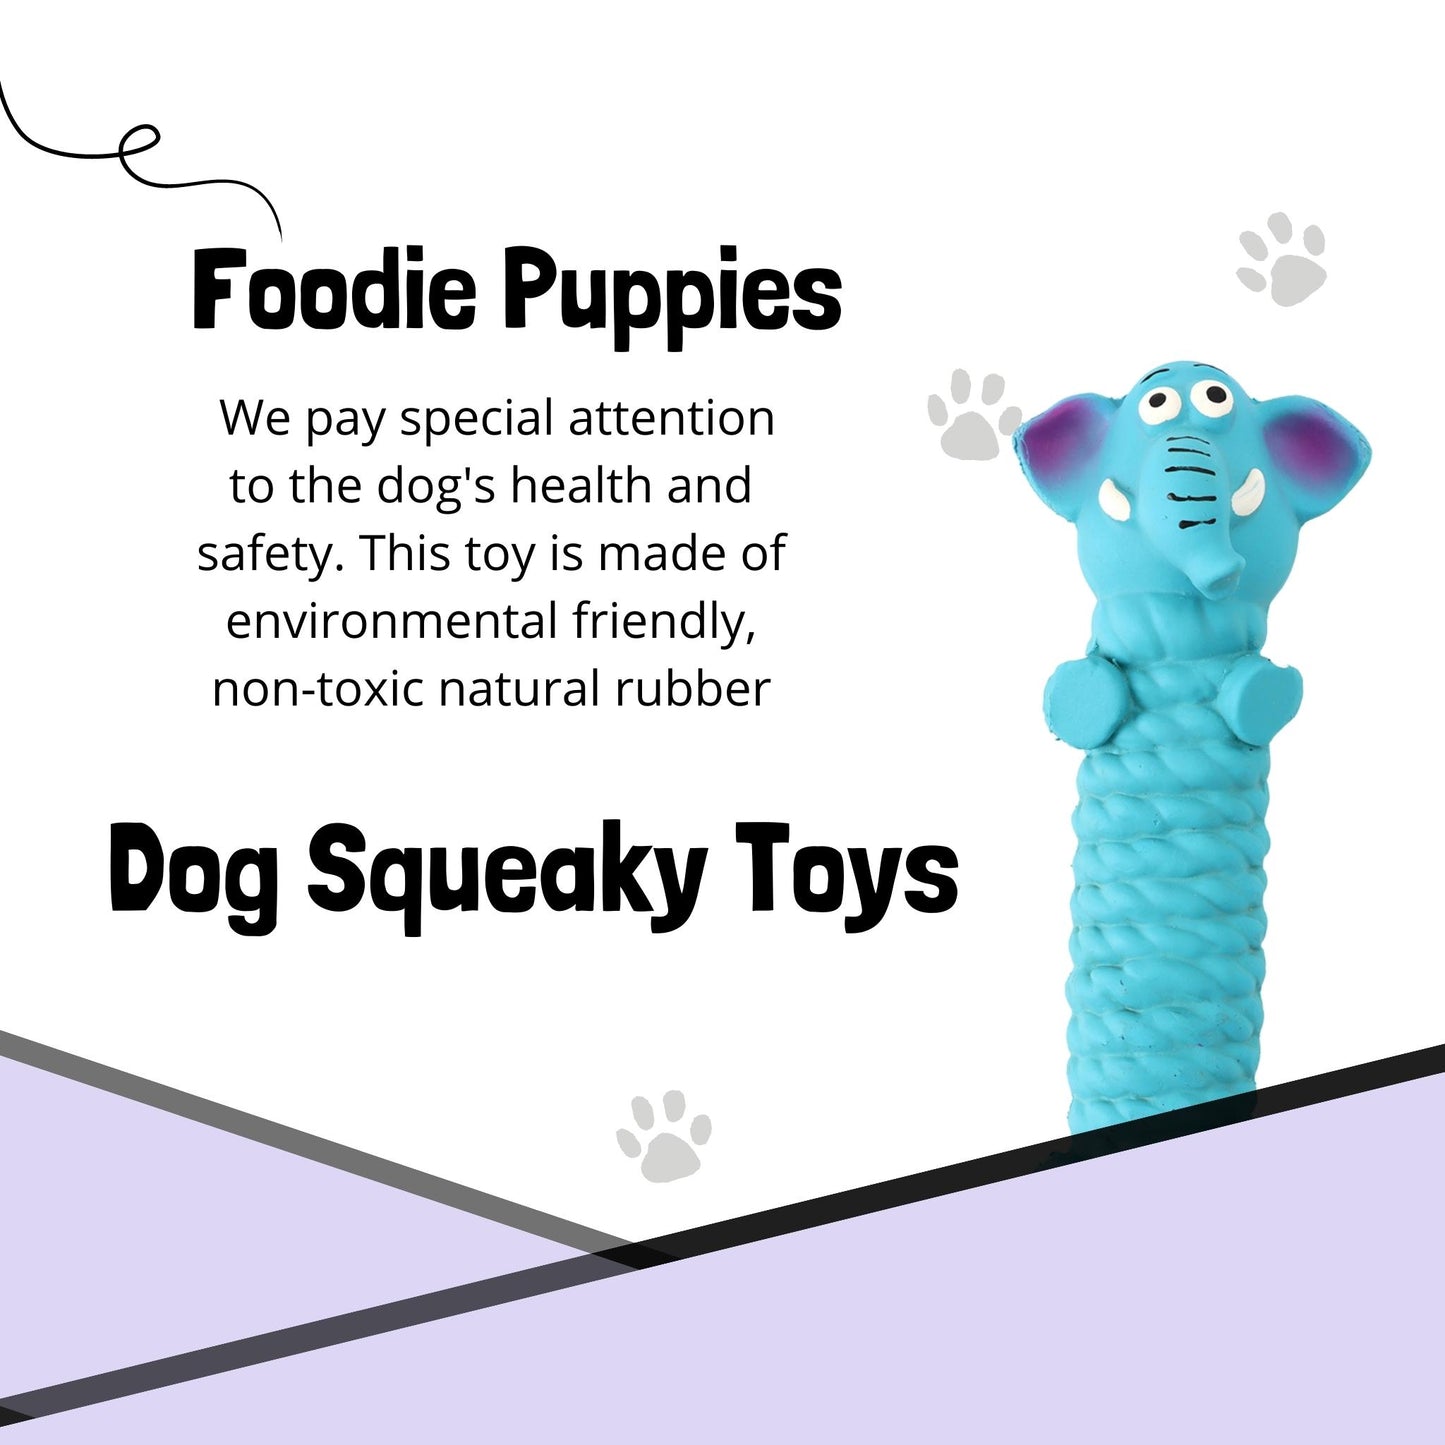 Foodie Puppies Latex Rubber Squeaky Dog Chew Toy - Blue Elephant